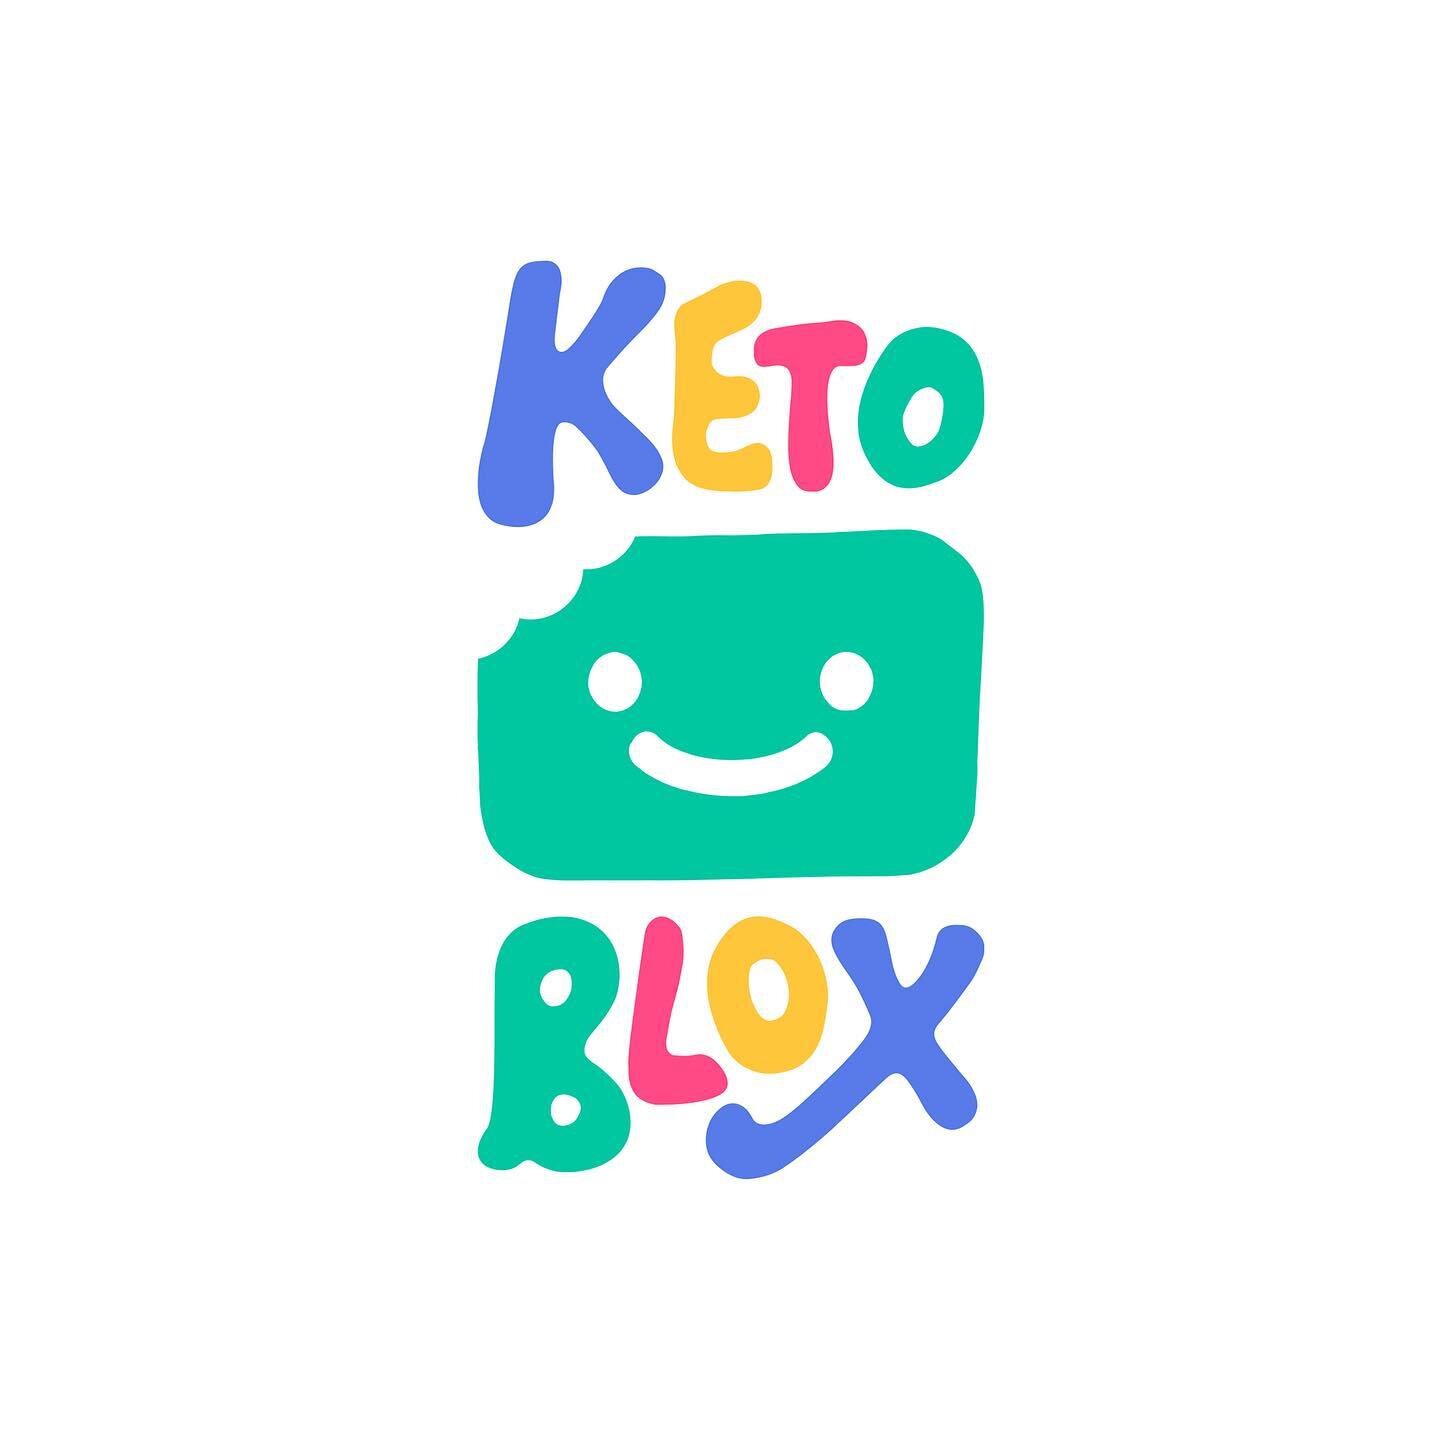 Only one word comes to mind when we think of Keto Blox and that&rsquo;s YUM!
Keto Blox wants to give the keto market a quality snack-able product which is easy to carry around, tasty, healthy and meets all the needs of a ketogenic diet. What a joy it